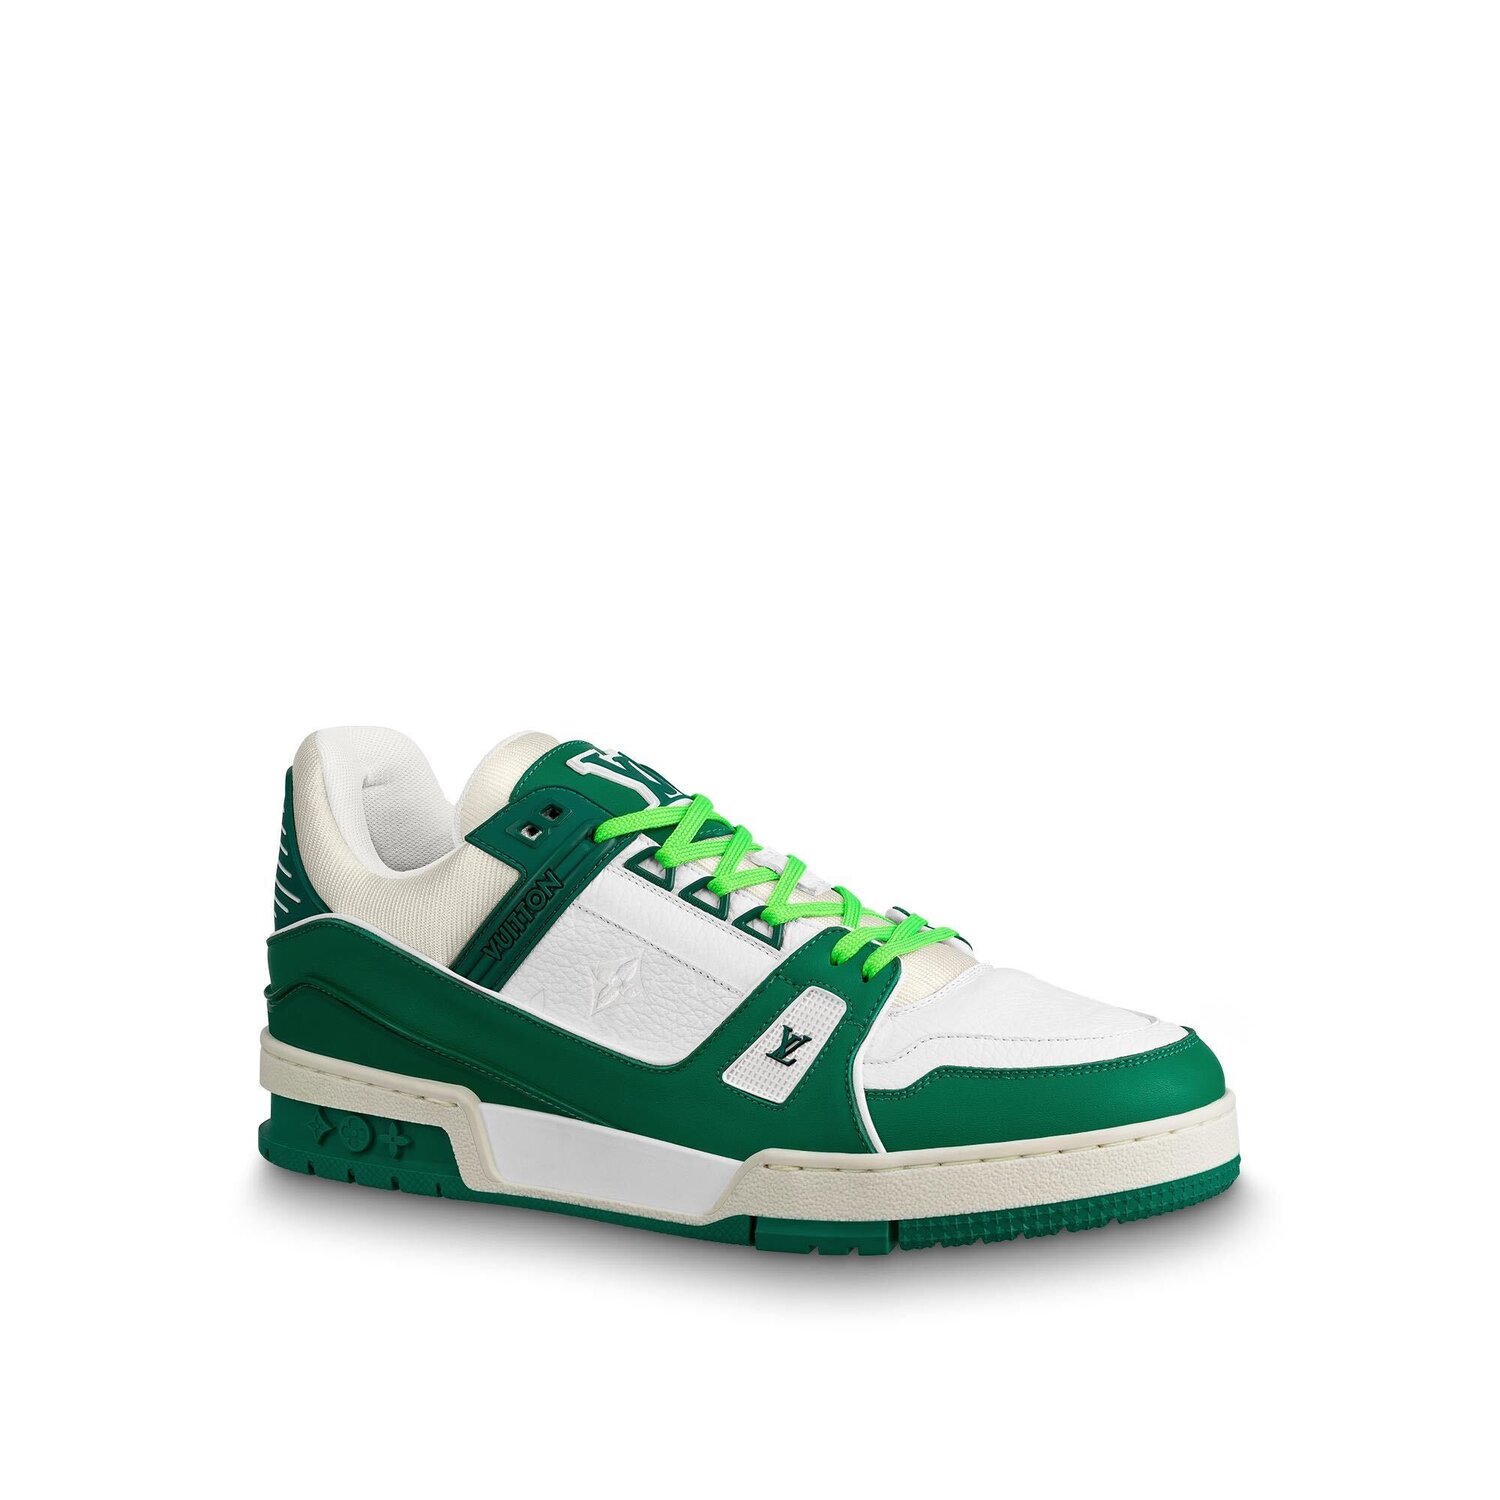 trainer green and white